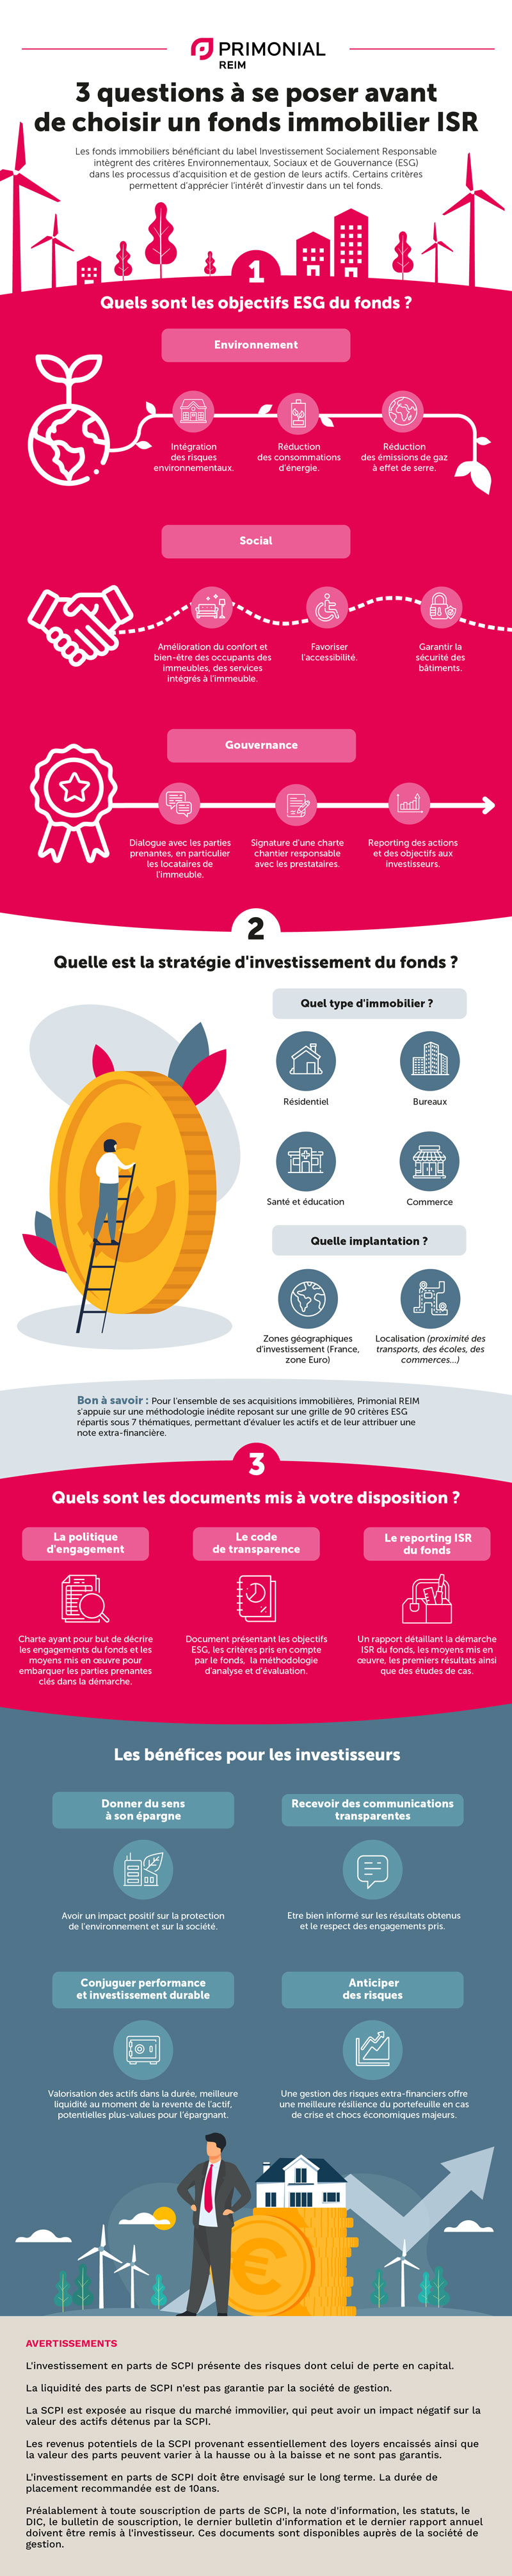 Infographie fonds immobilier ISR